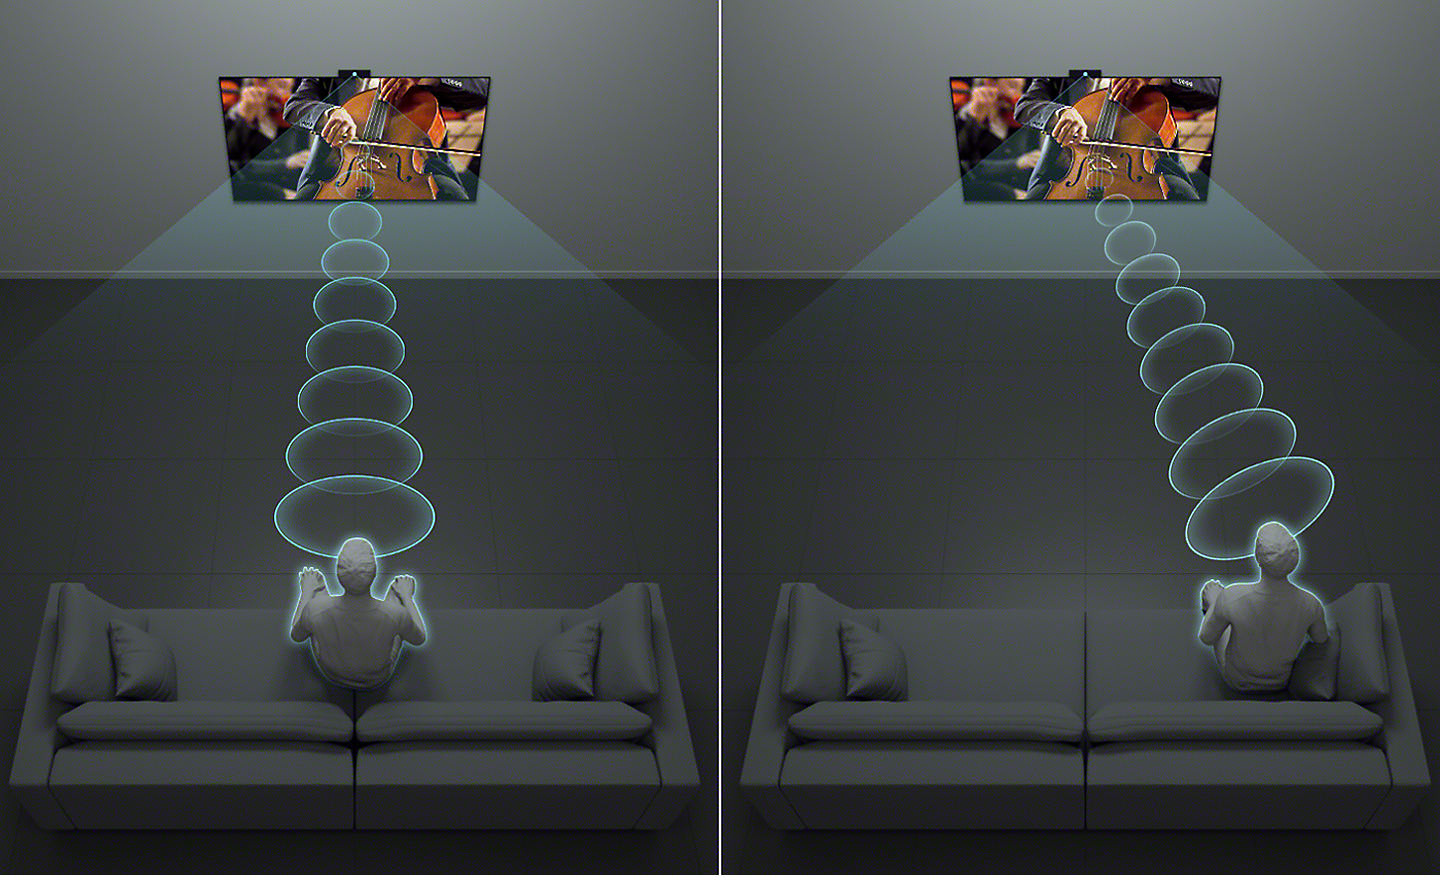 Split-screen graphic showing a person listening to TV from the front and a person listening to TV from the side